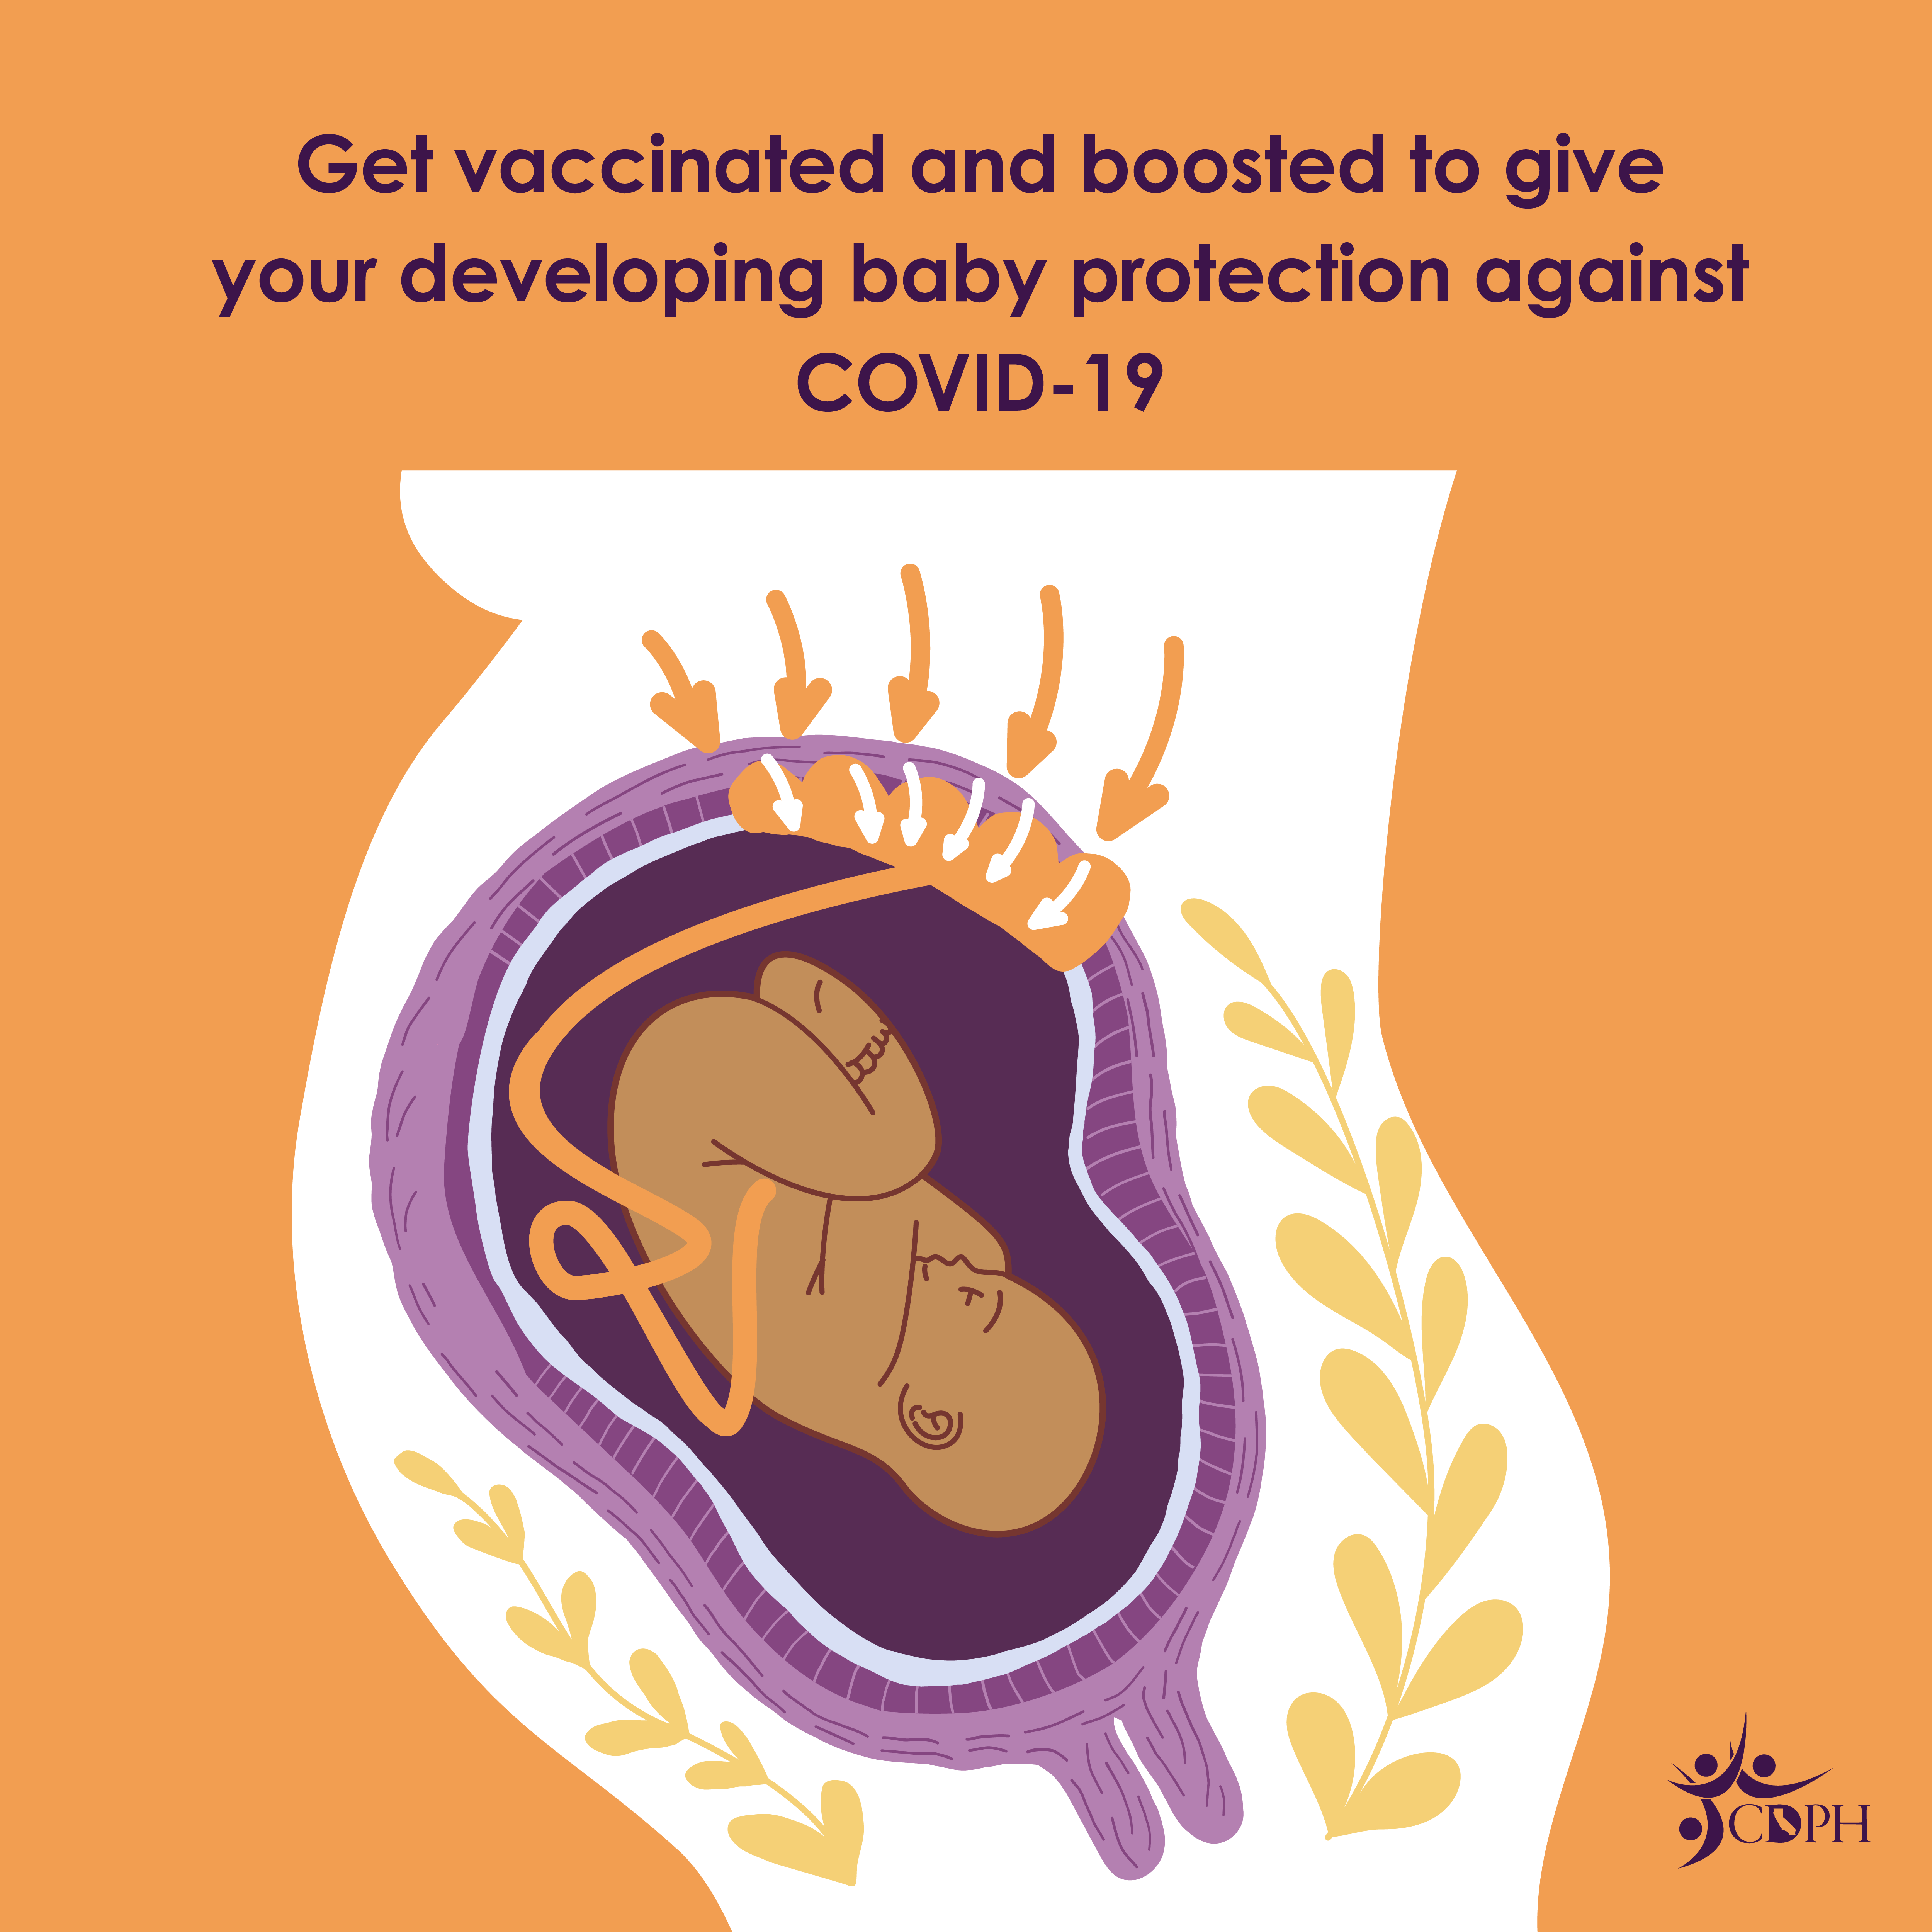 Get vaccinated and boosted to give your developing baby protection against COVID-19